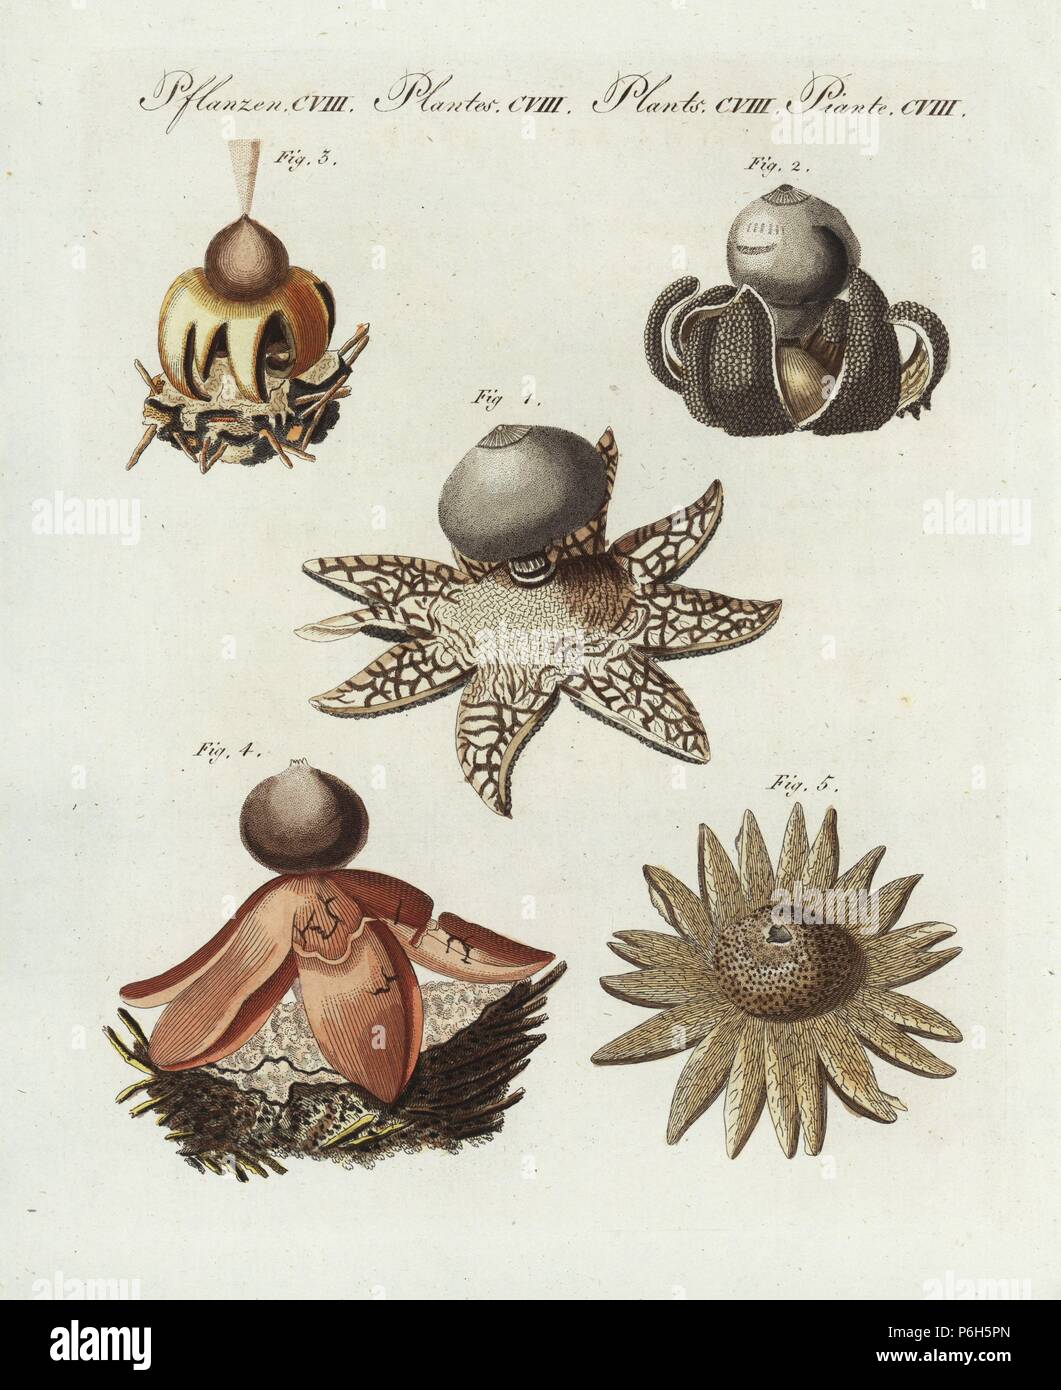 German earthstar fungi: Geastrum coronatum 1,2, Geastrum rufescens 3,4 and barometer earthstar, Astraeus hygrometricus 5. Handcoloured copperplate engraving from Bertuch's 'Bilderbuch fur Kinder' (Picture Book for Children), Weimar, 1807. Friedrich Johann Bertuch (1747-1822) was a German publisher and man of arts most famous for his 12-volume encyclopedia for children illustrated with 1,200 engraved plates on natural history, science, costume, mythology, etc., published from 1790-1830. Stock Photo